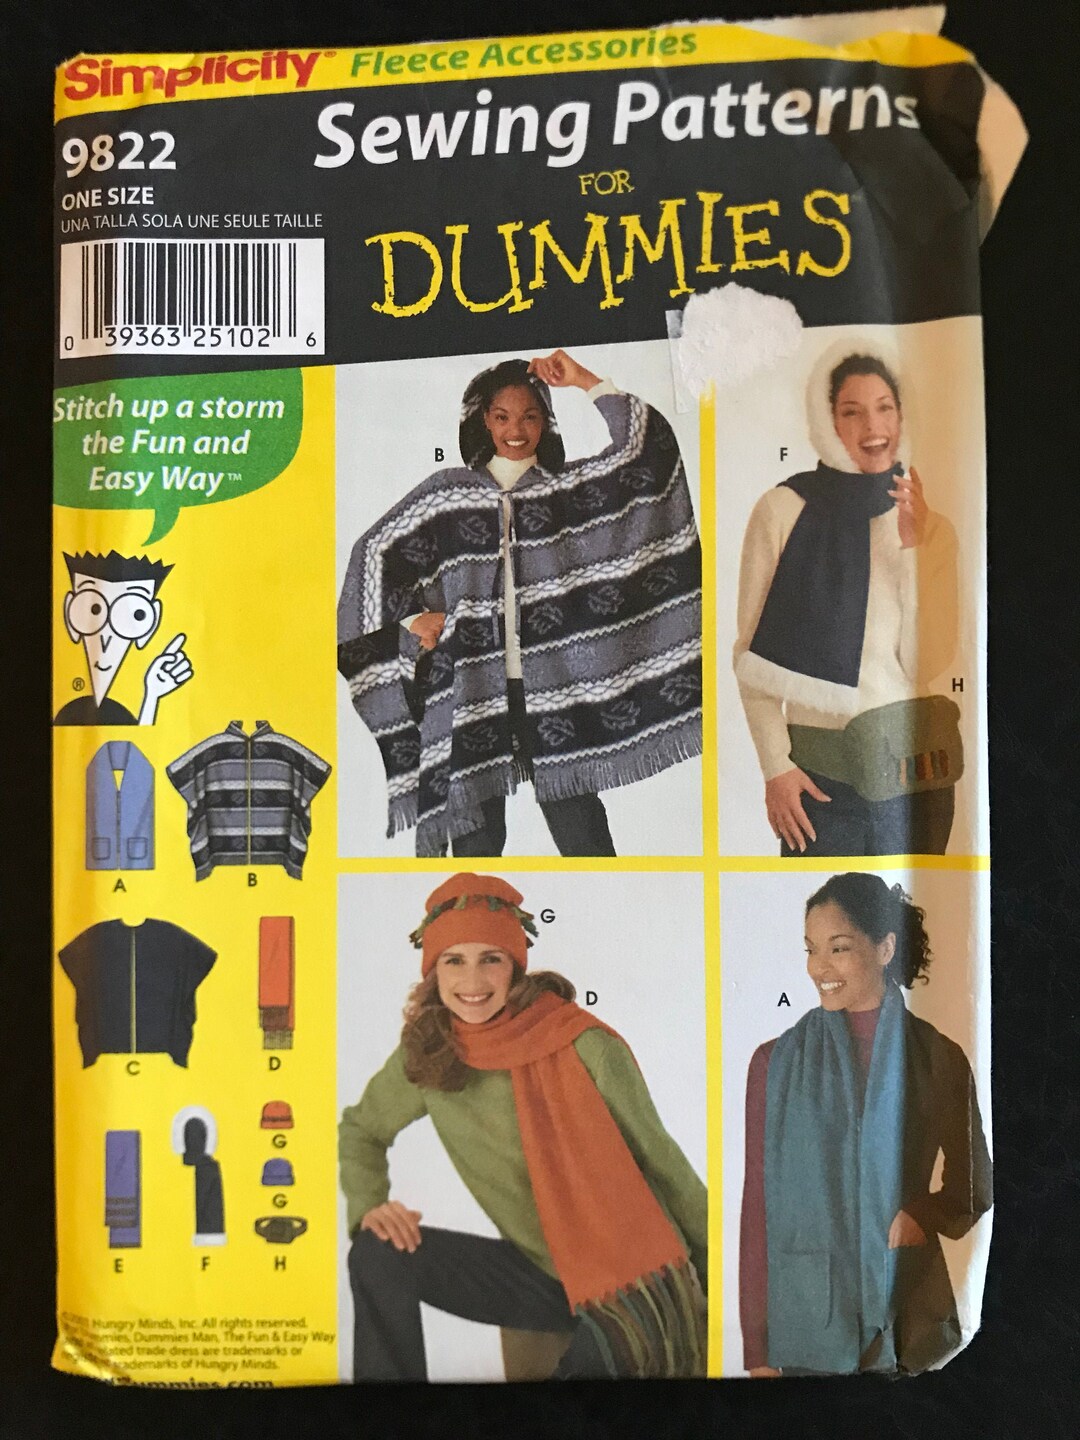 Simplicity 0600 9822 Pattern UNCUT Sewing Patterns for Dummies - Etsy